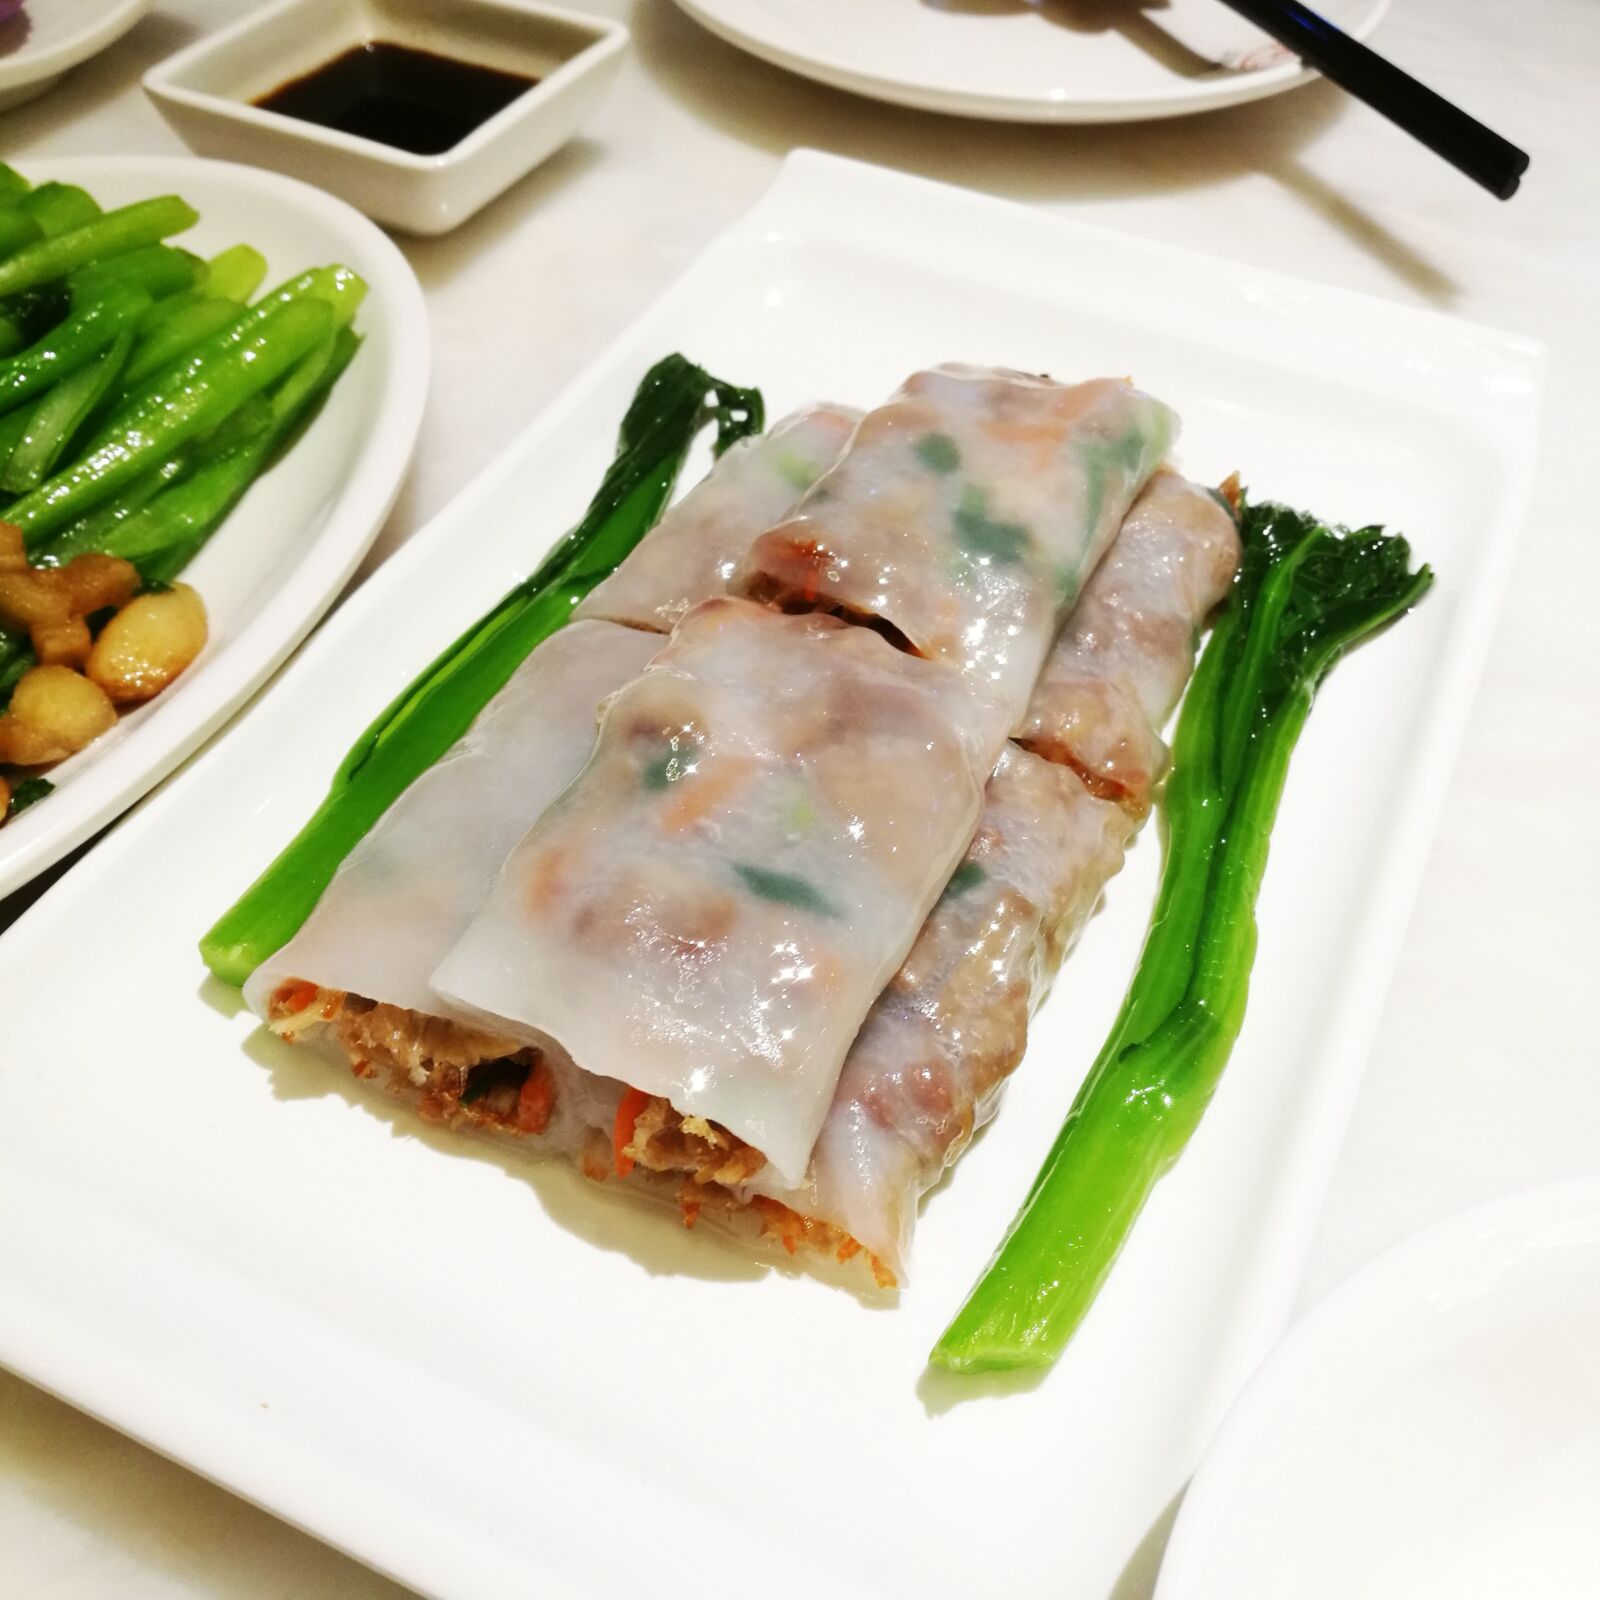 HUAWEI Honor 8 sample photo. Food, meals, plate photography